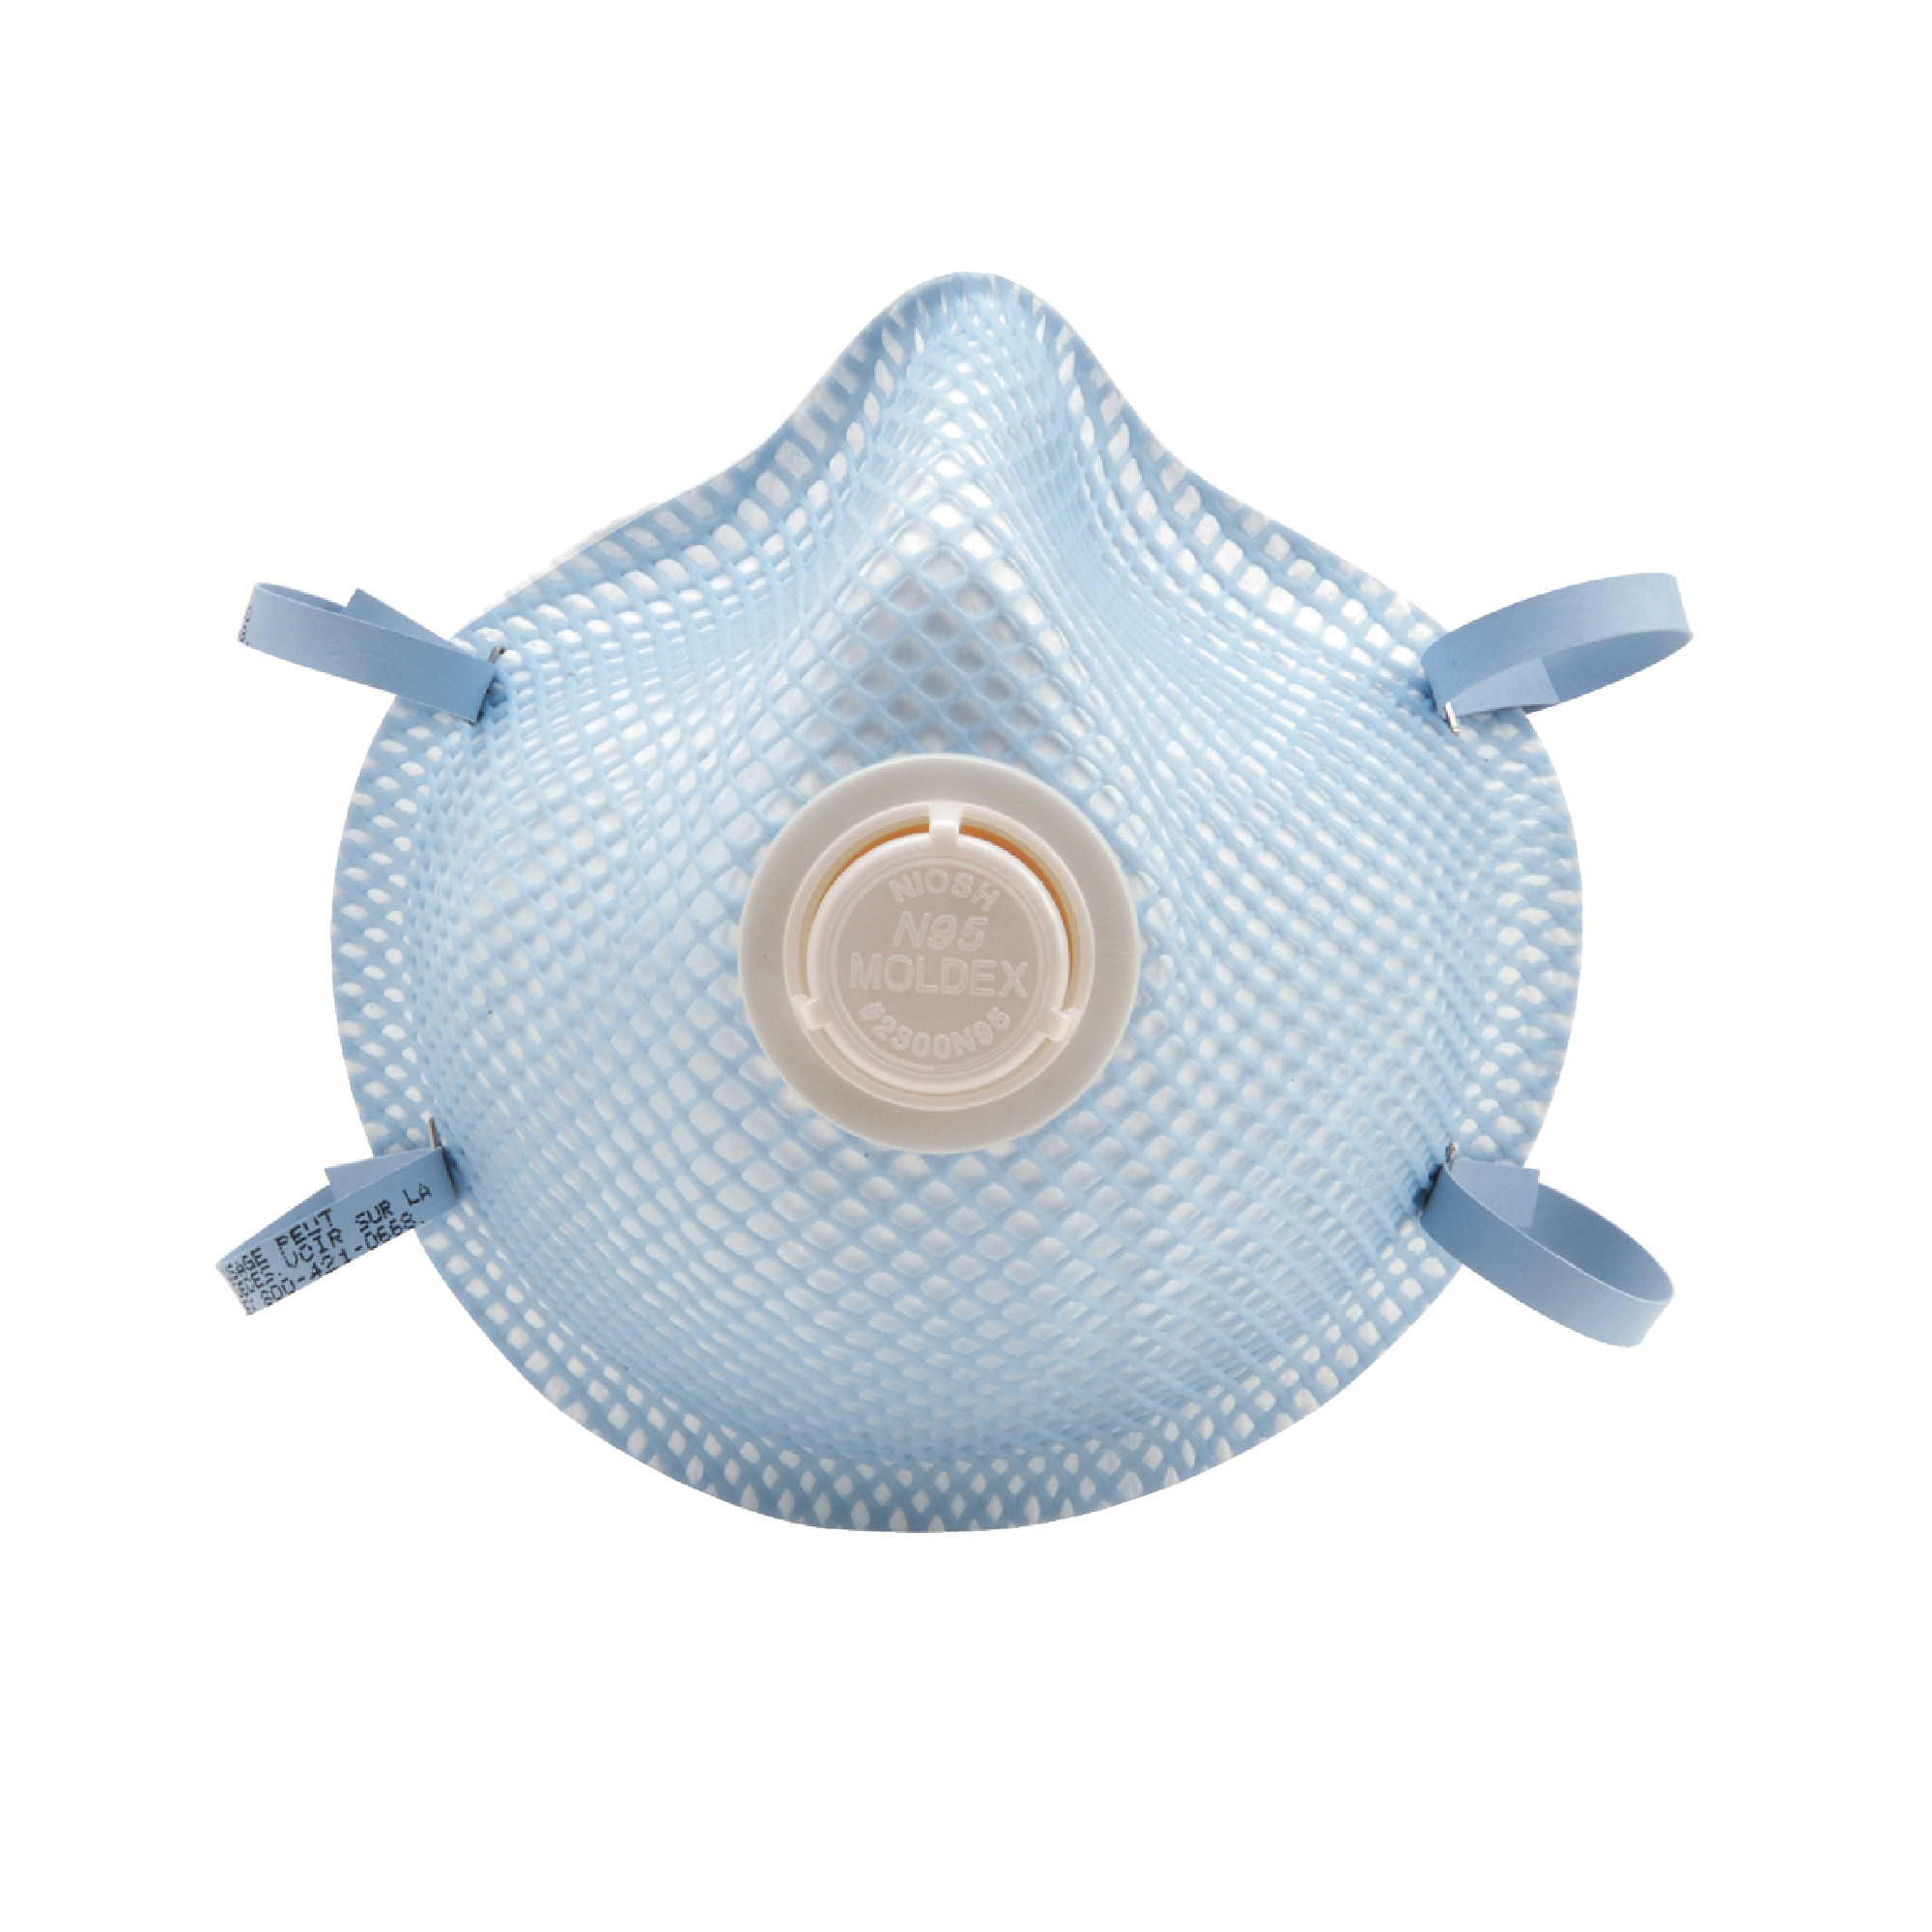 N95 Particulate Mask 10 Piece Box